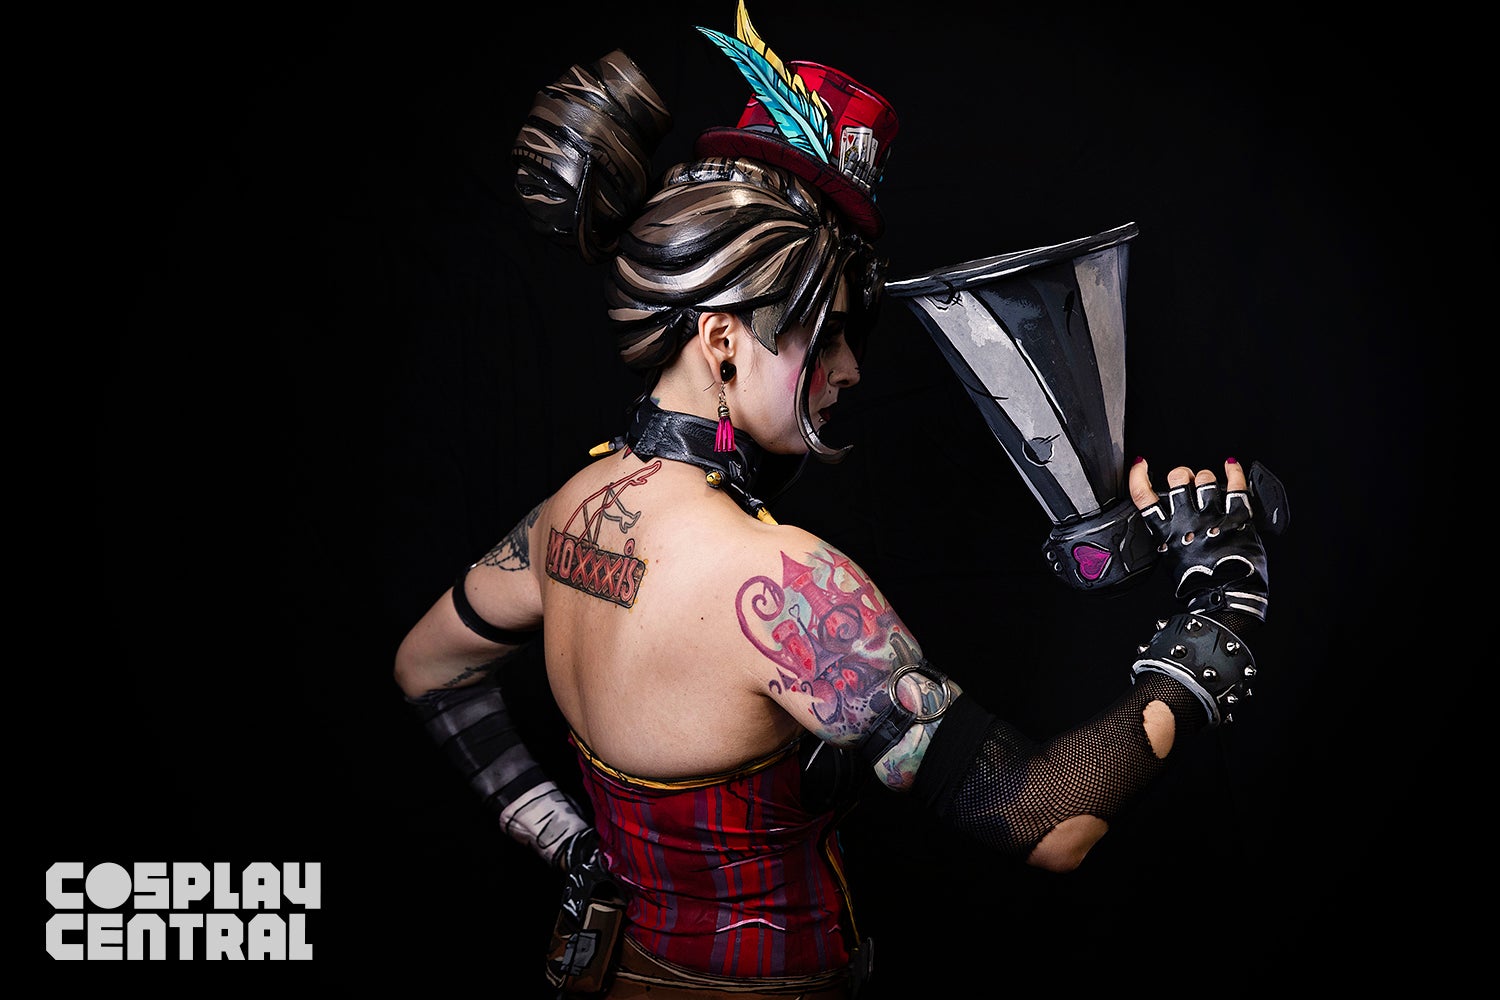 Jessilyn Cupcake's Borderlands cosplay from New York Comic Con 2019